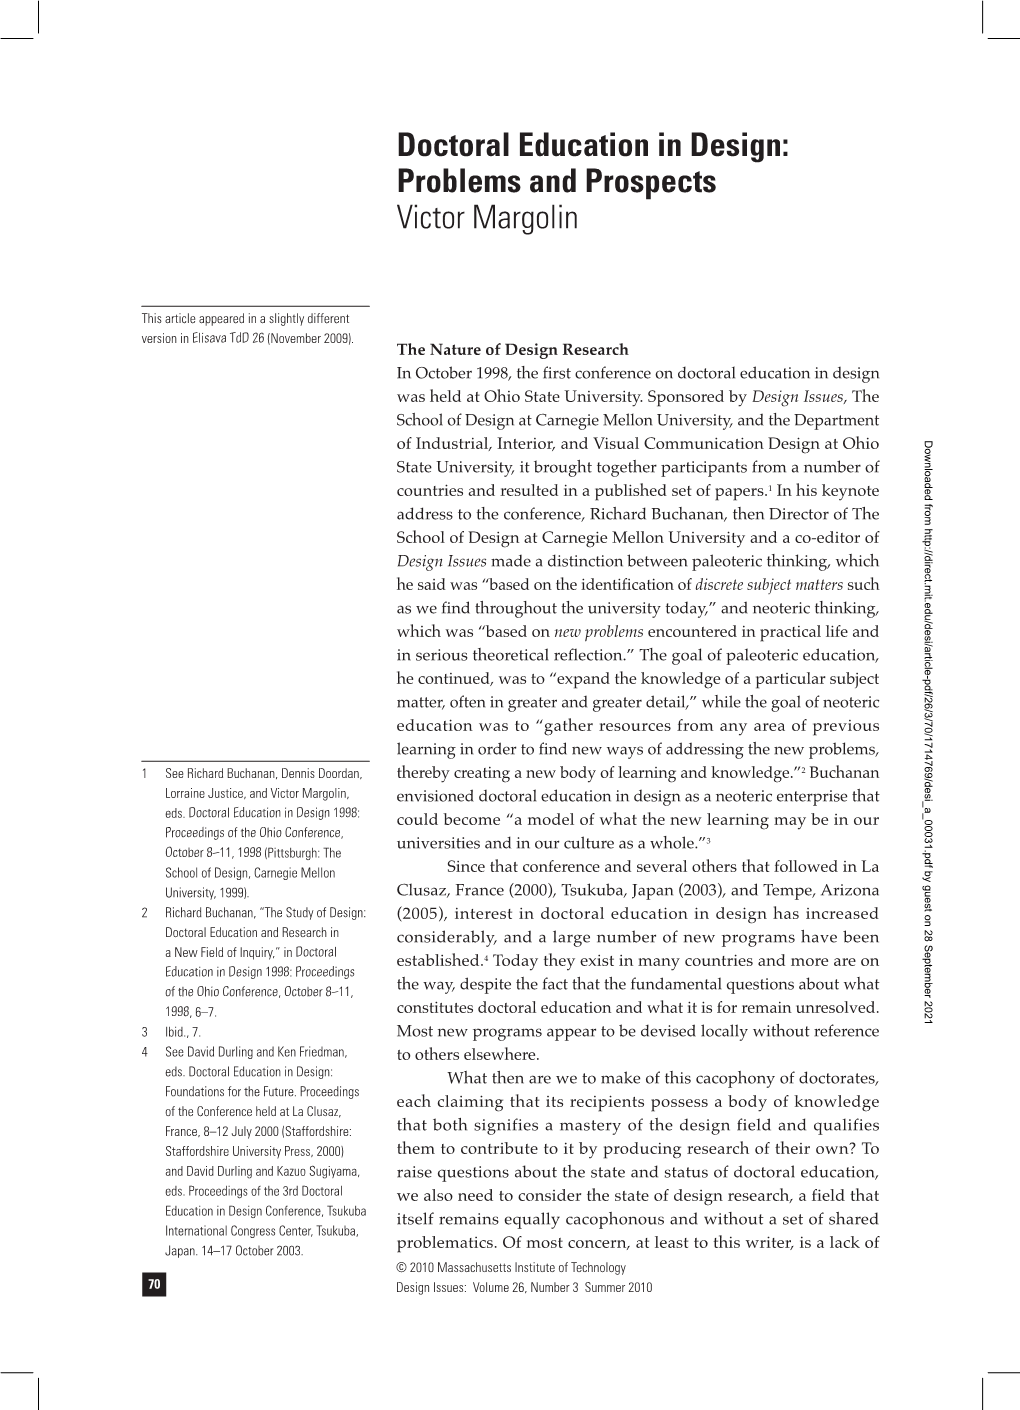 Doctoral Education in Design: Problems and Prospects Victor Margolin